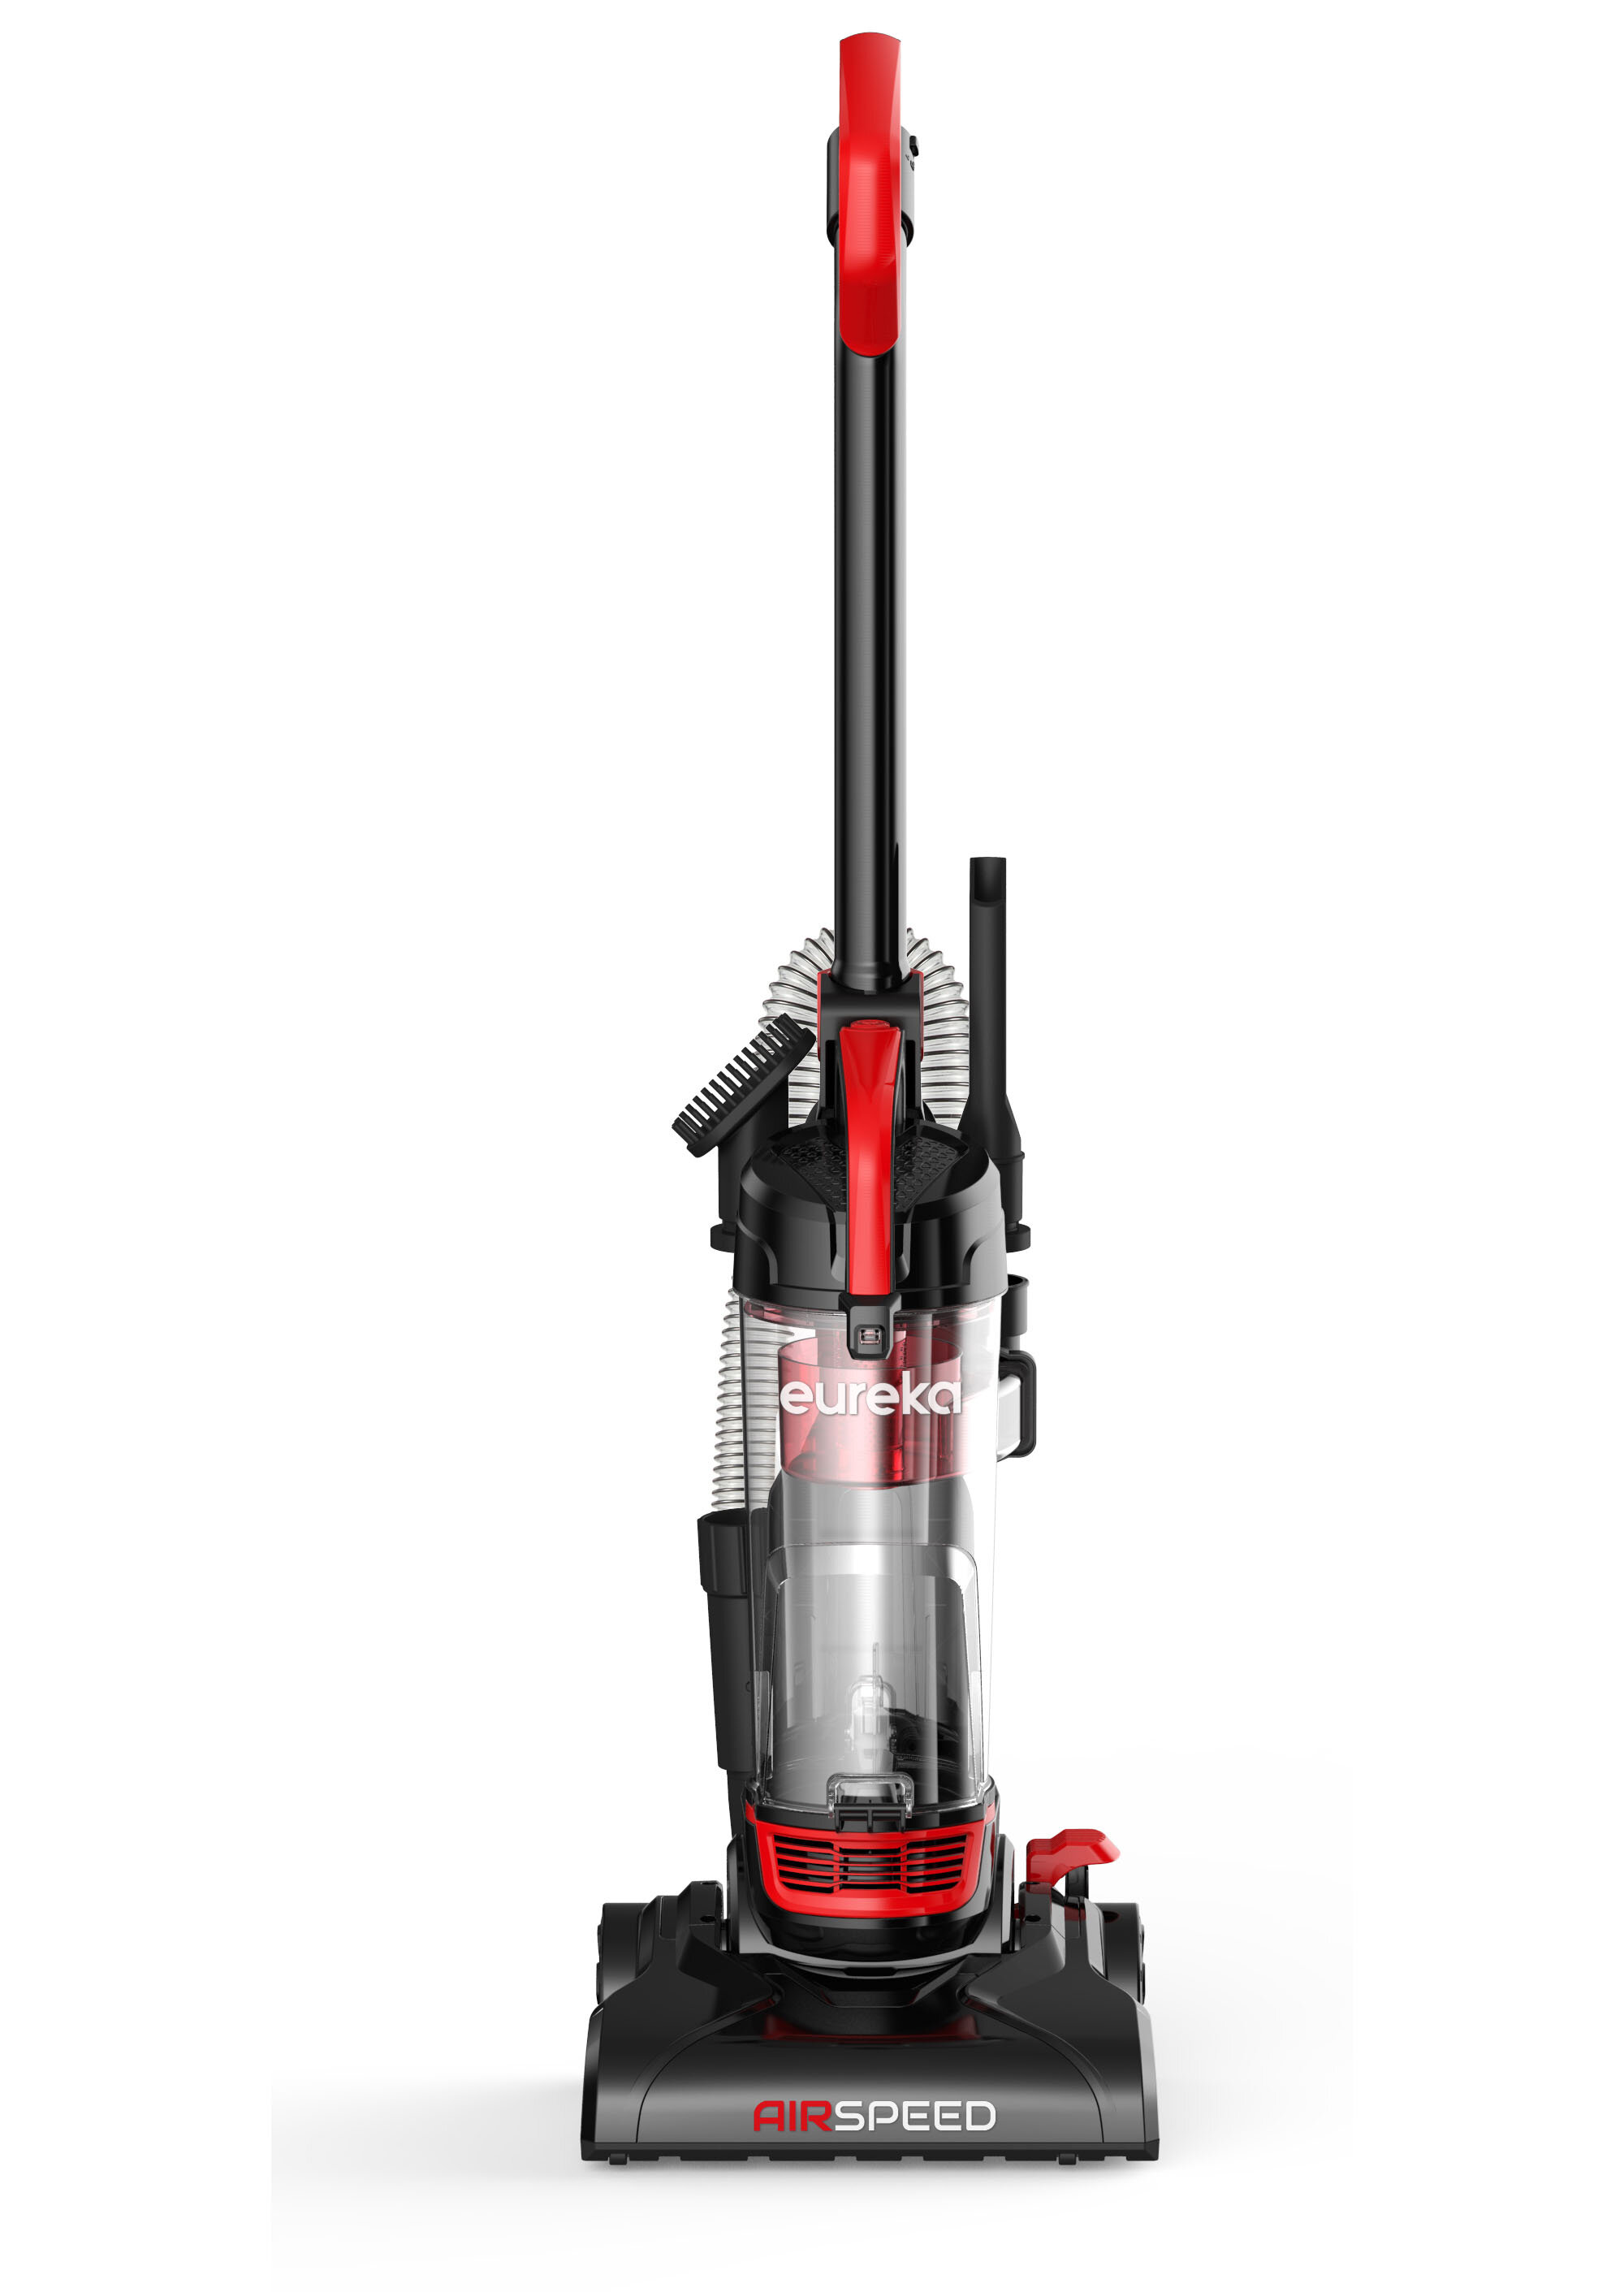 Eureka Canister Vacuum Cleaner 13.5 Inch Crevice Tool 